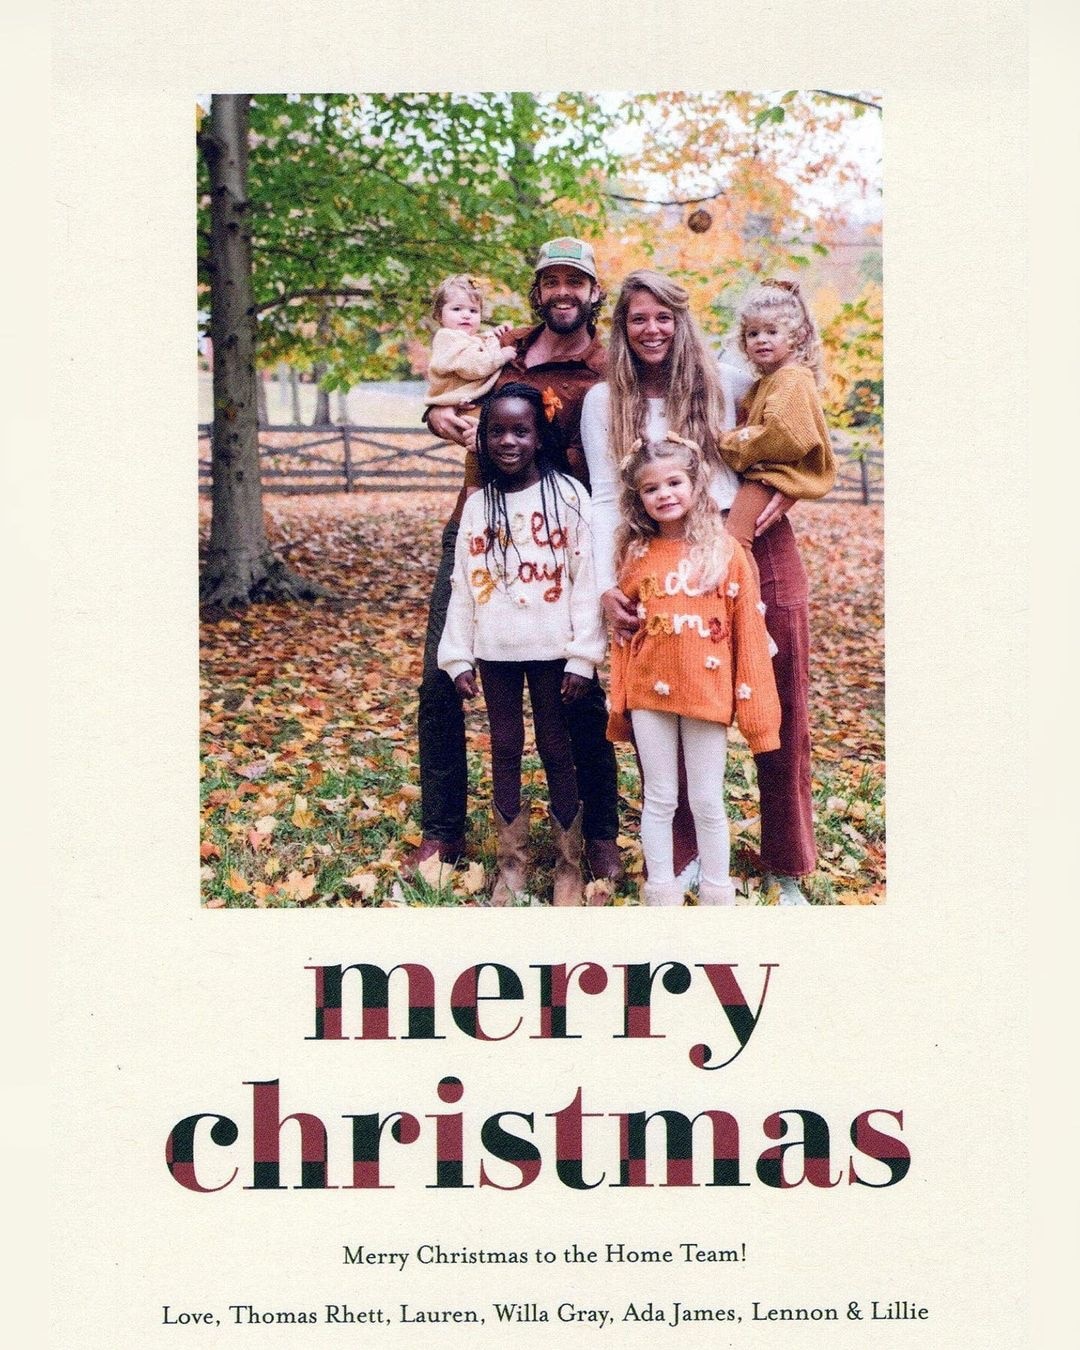 9 Family Christmas Card Photos with Pets That Are Too Pure for This World